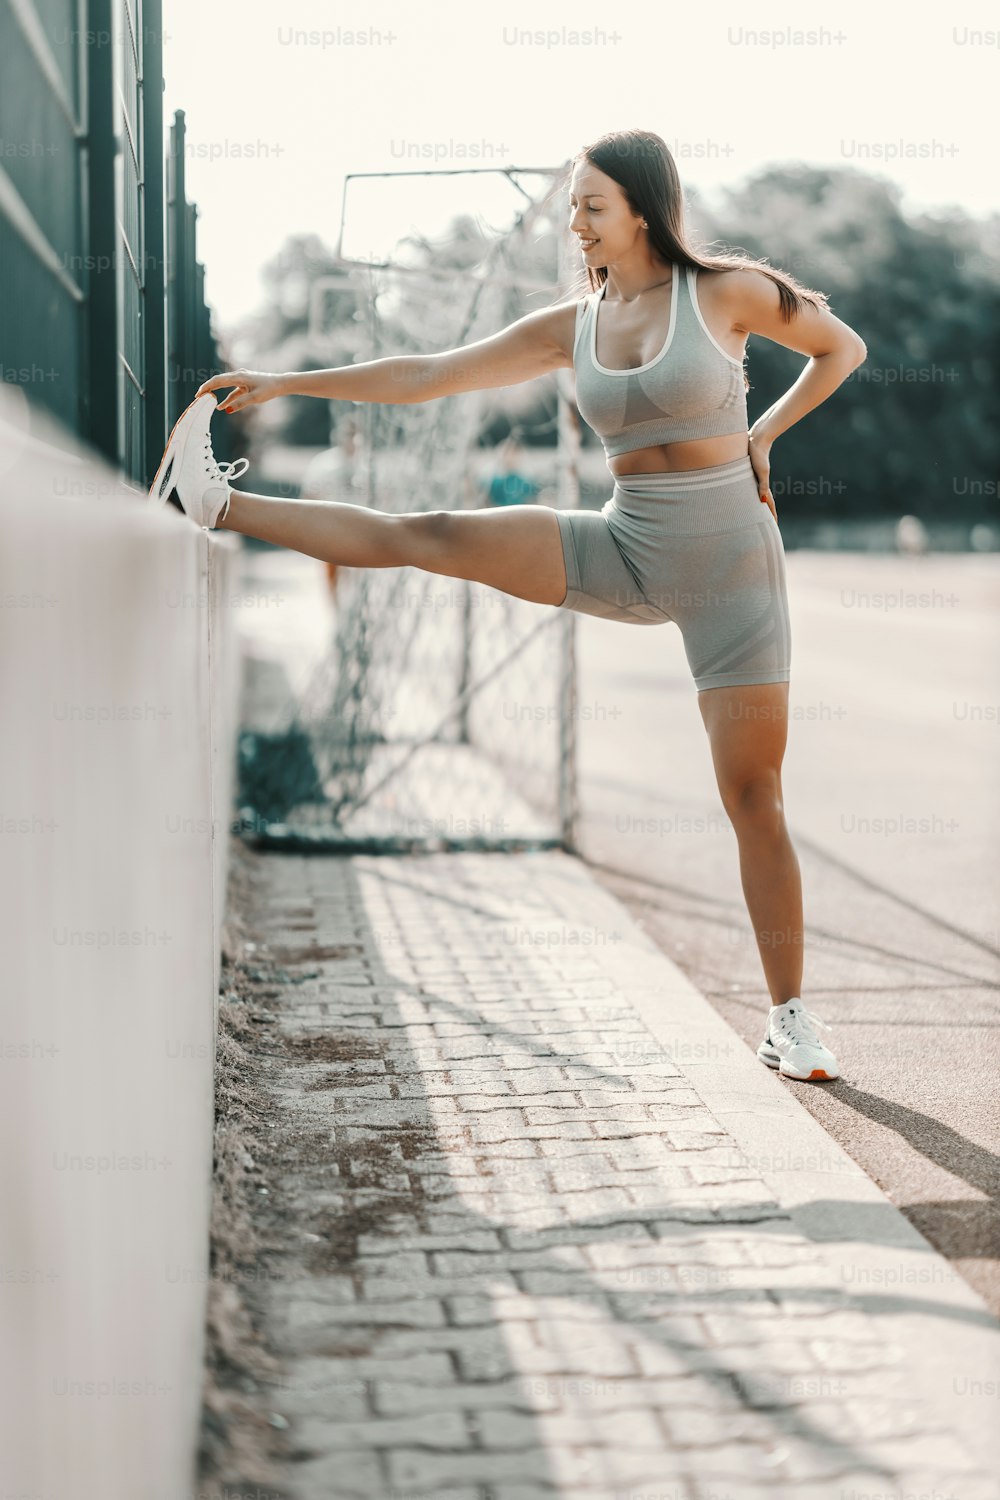 Stretching leg muscles in training. A woman in tight fitness clothes stretches her leg muscles during a workout. She has raised her foot on the concrete fence and is preparing for a street workout